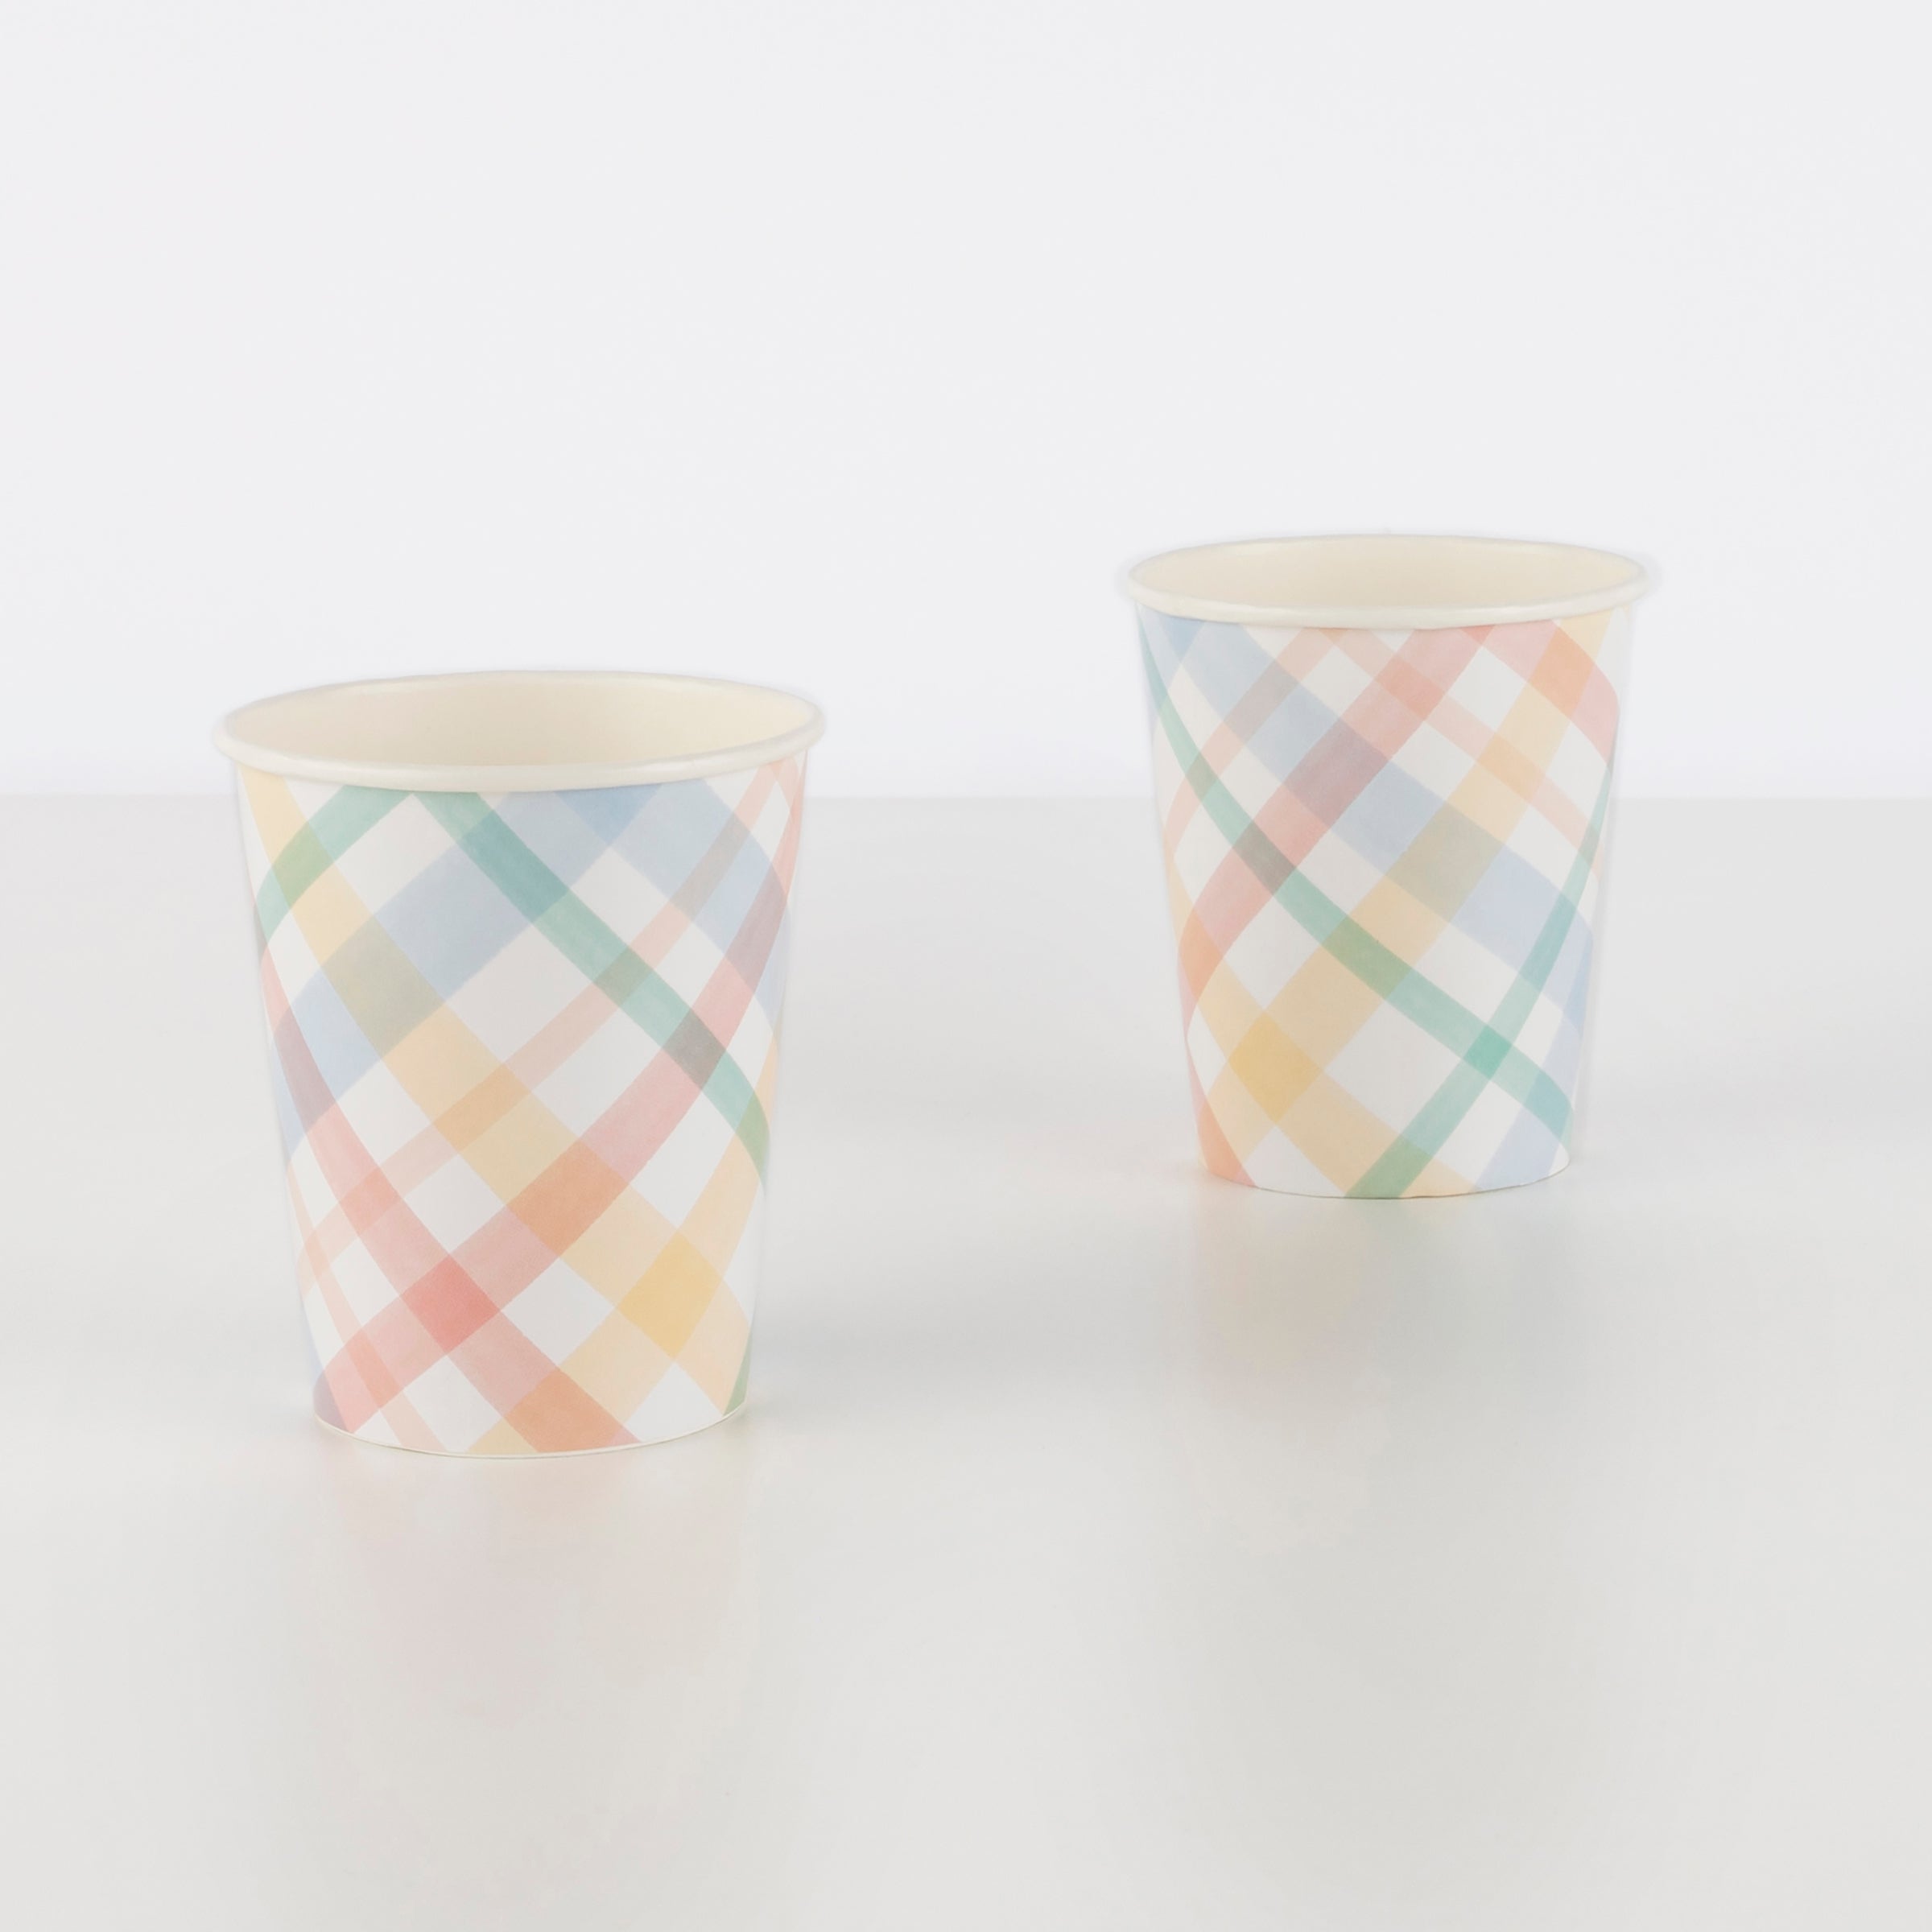 These party cups look amazing in striped pastel colours.